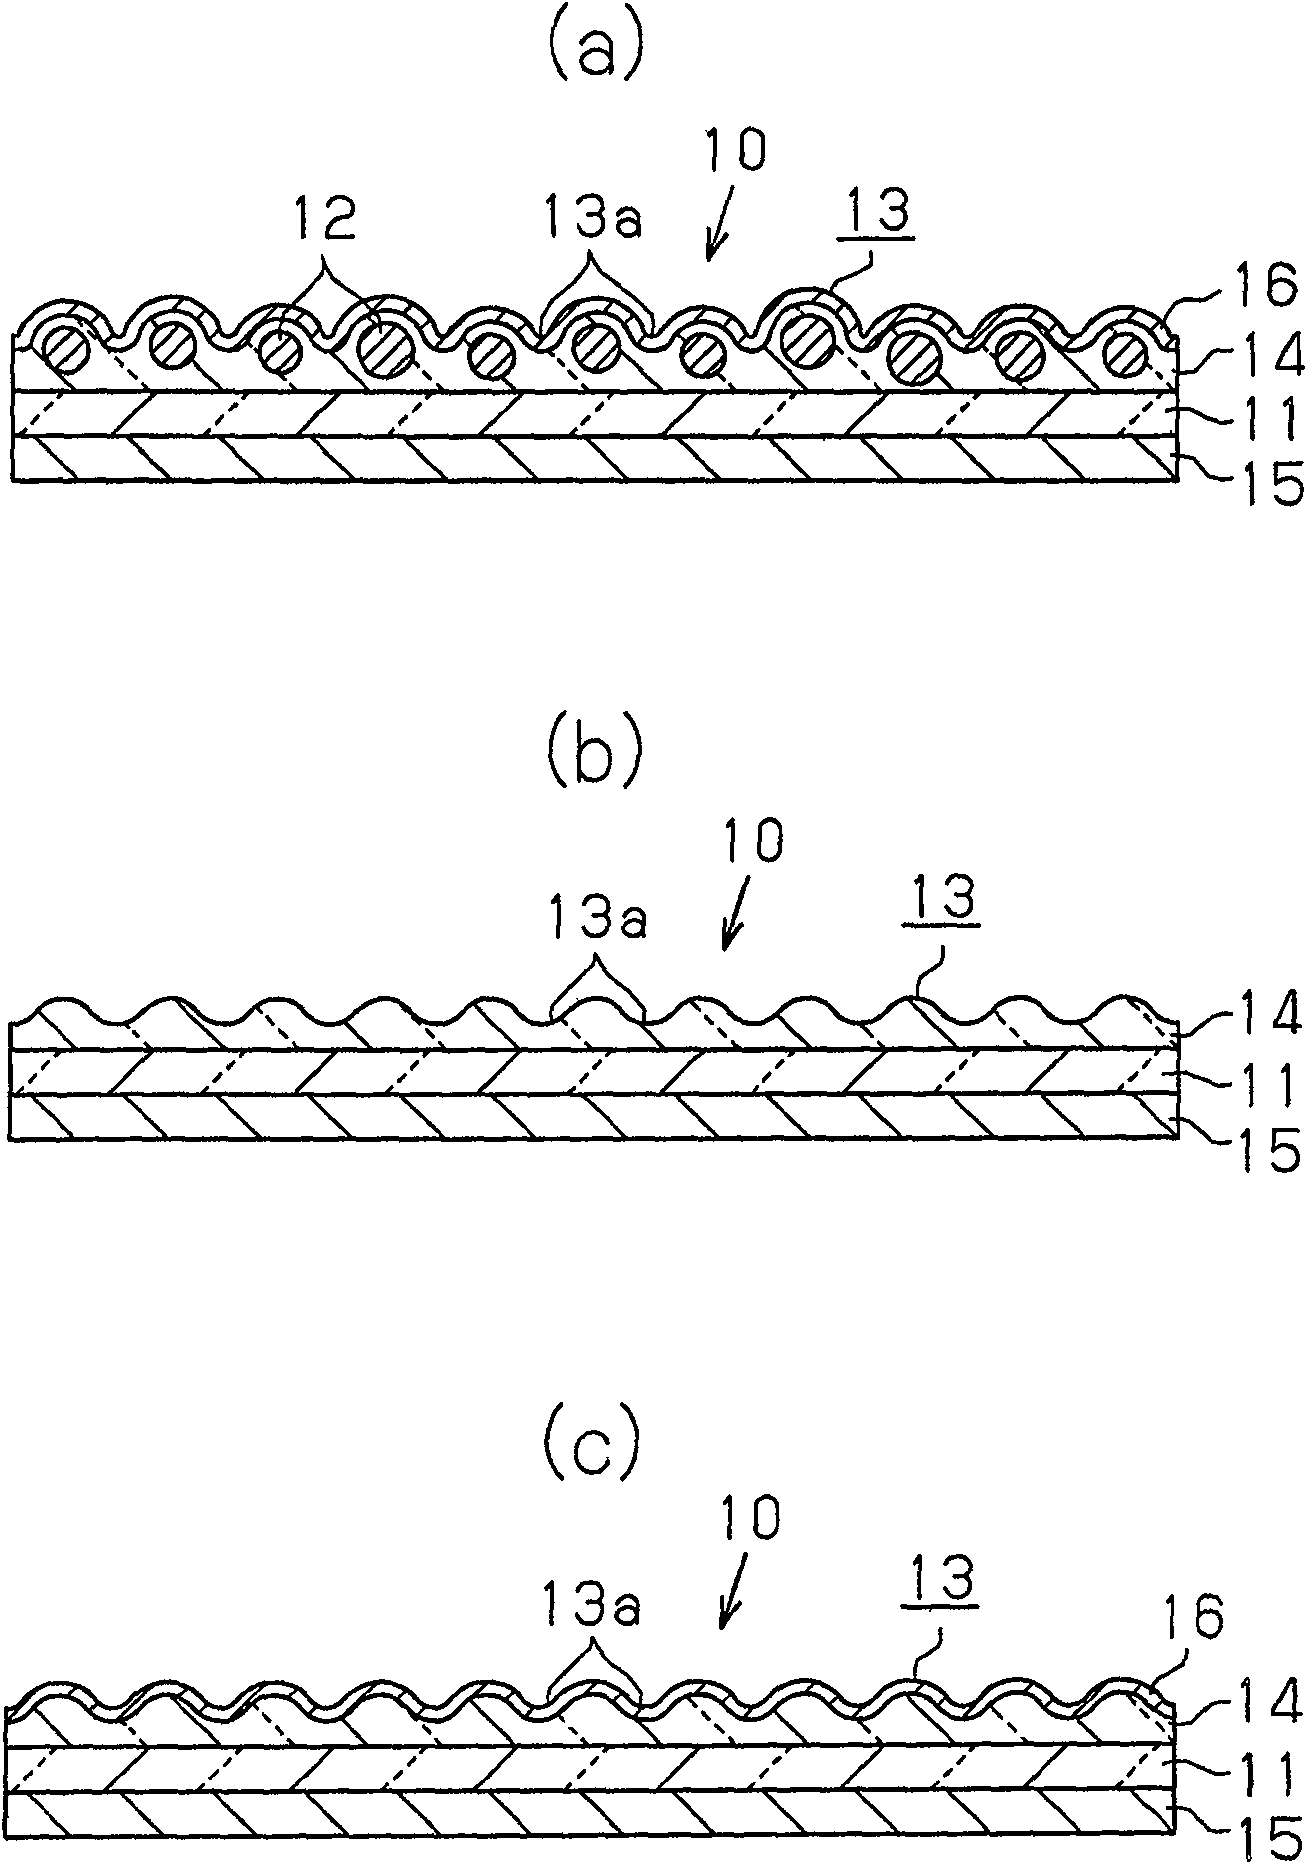 Surface material for display and display with the same